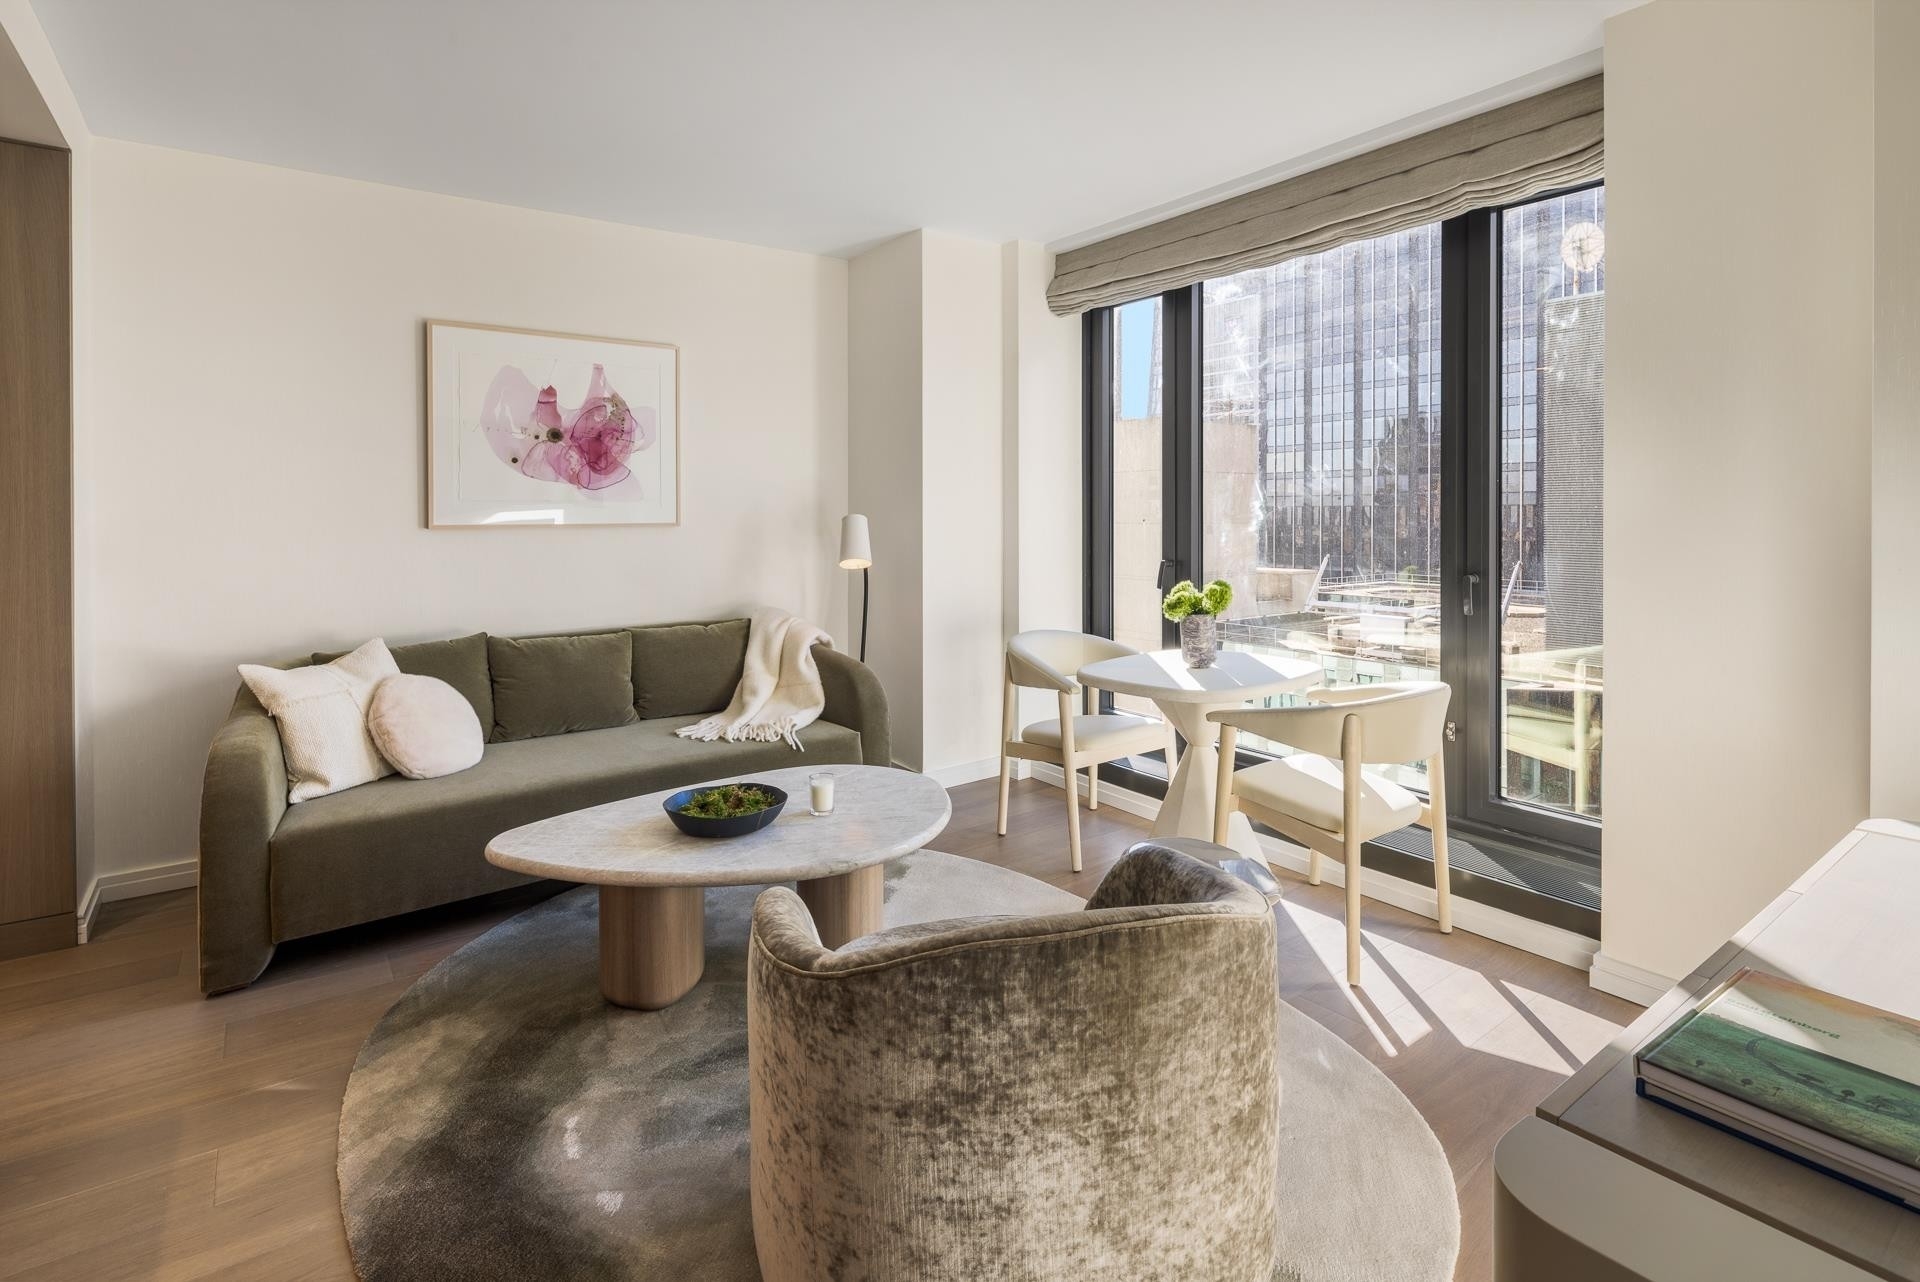 Condominium for Sale at One11, 111 W 56TH ST, 34H Midtown West, New York, New York 10019